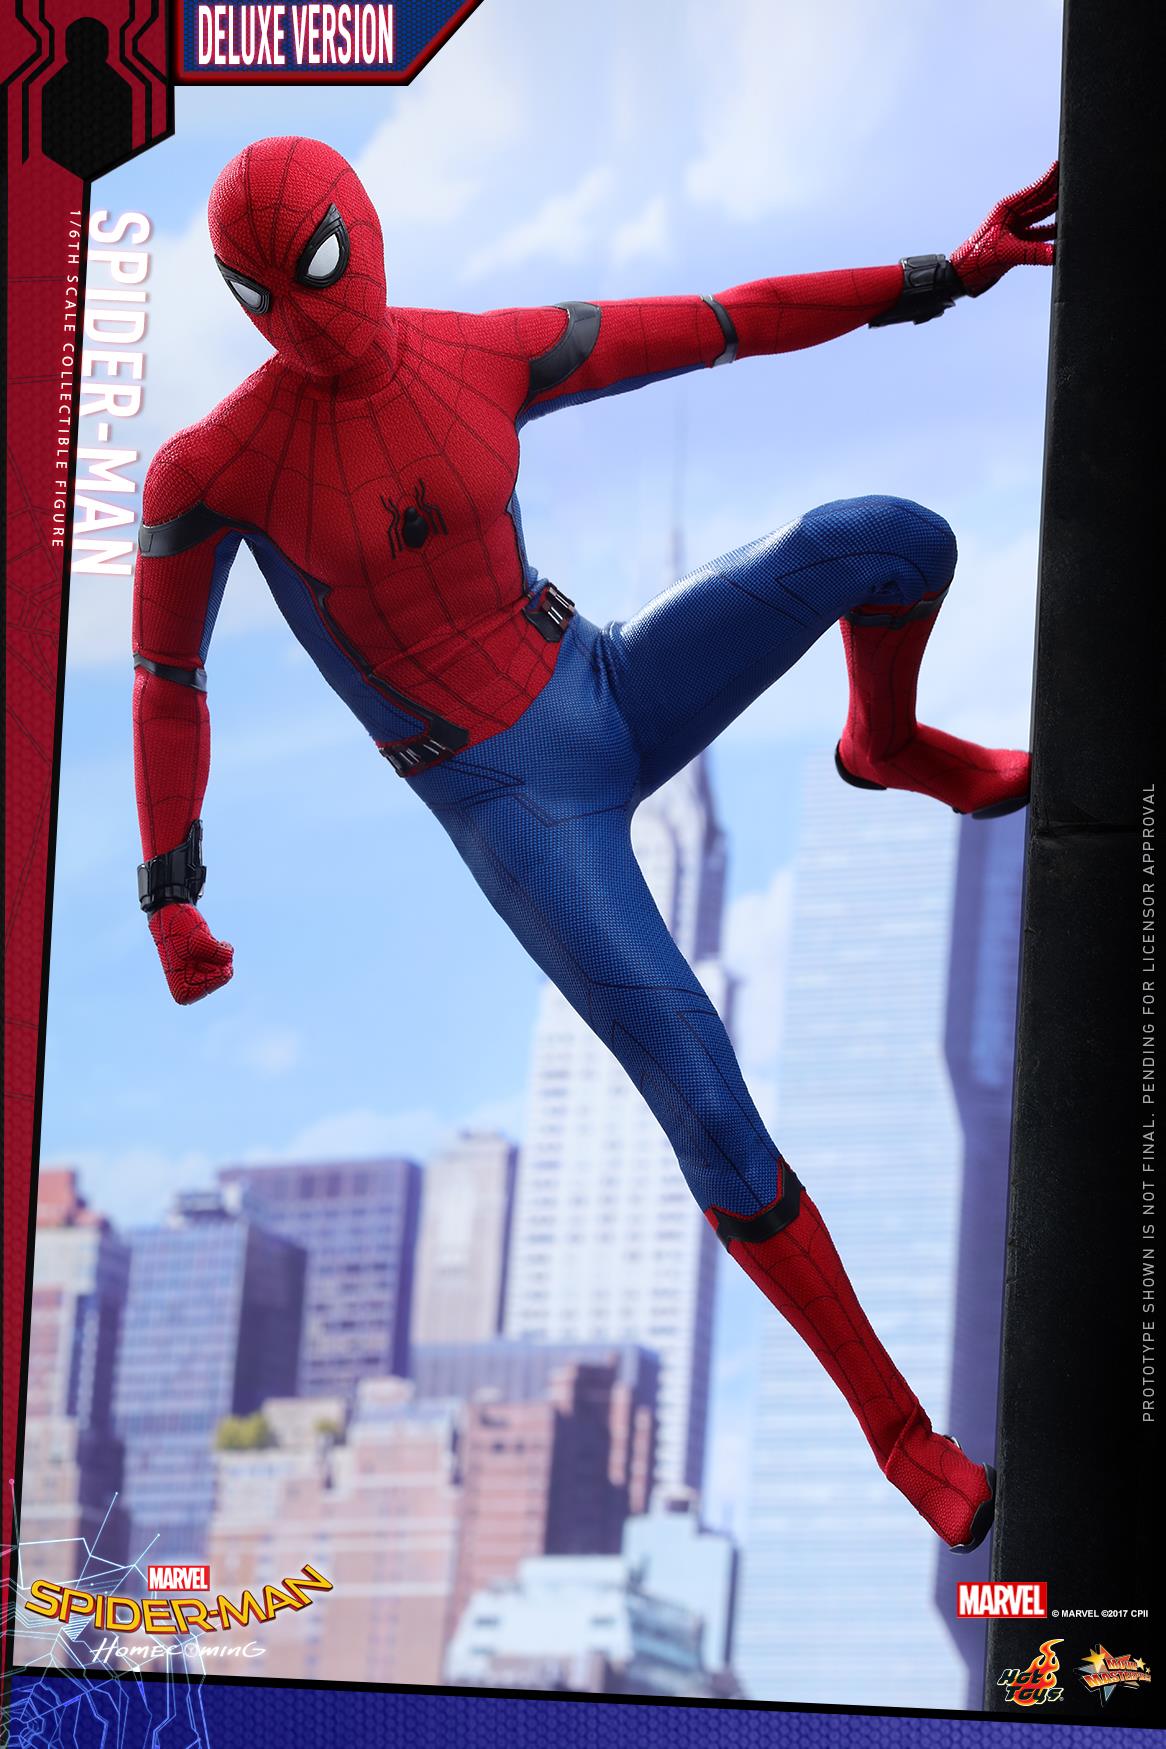 Hot-Toys-Spider-Man-Homecoming-Deluxe-Figure-004.jpg